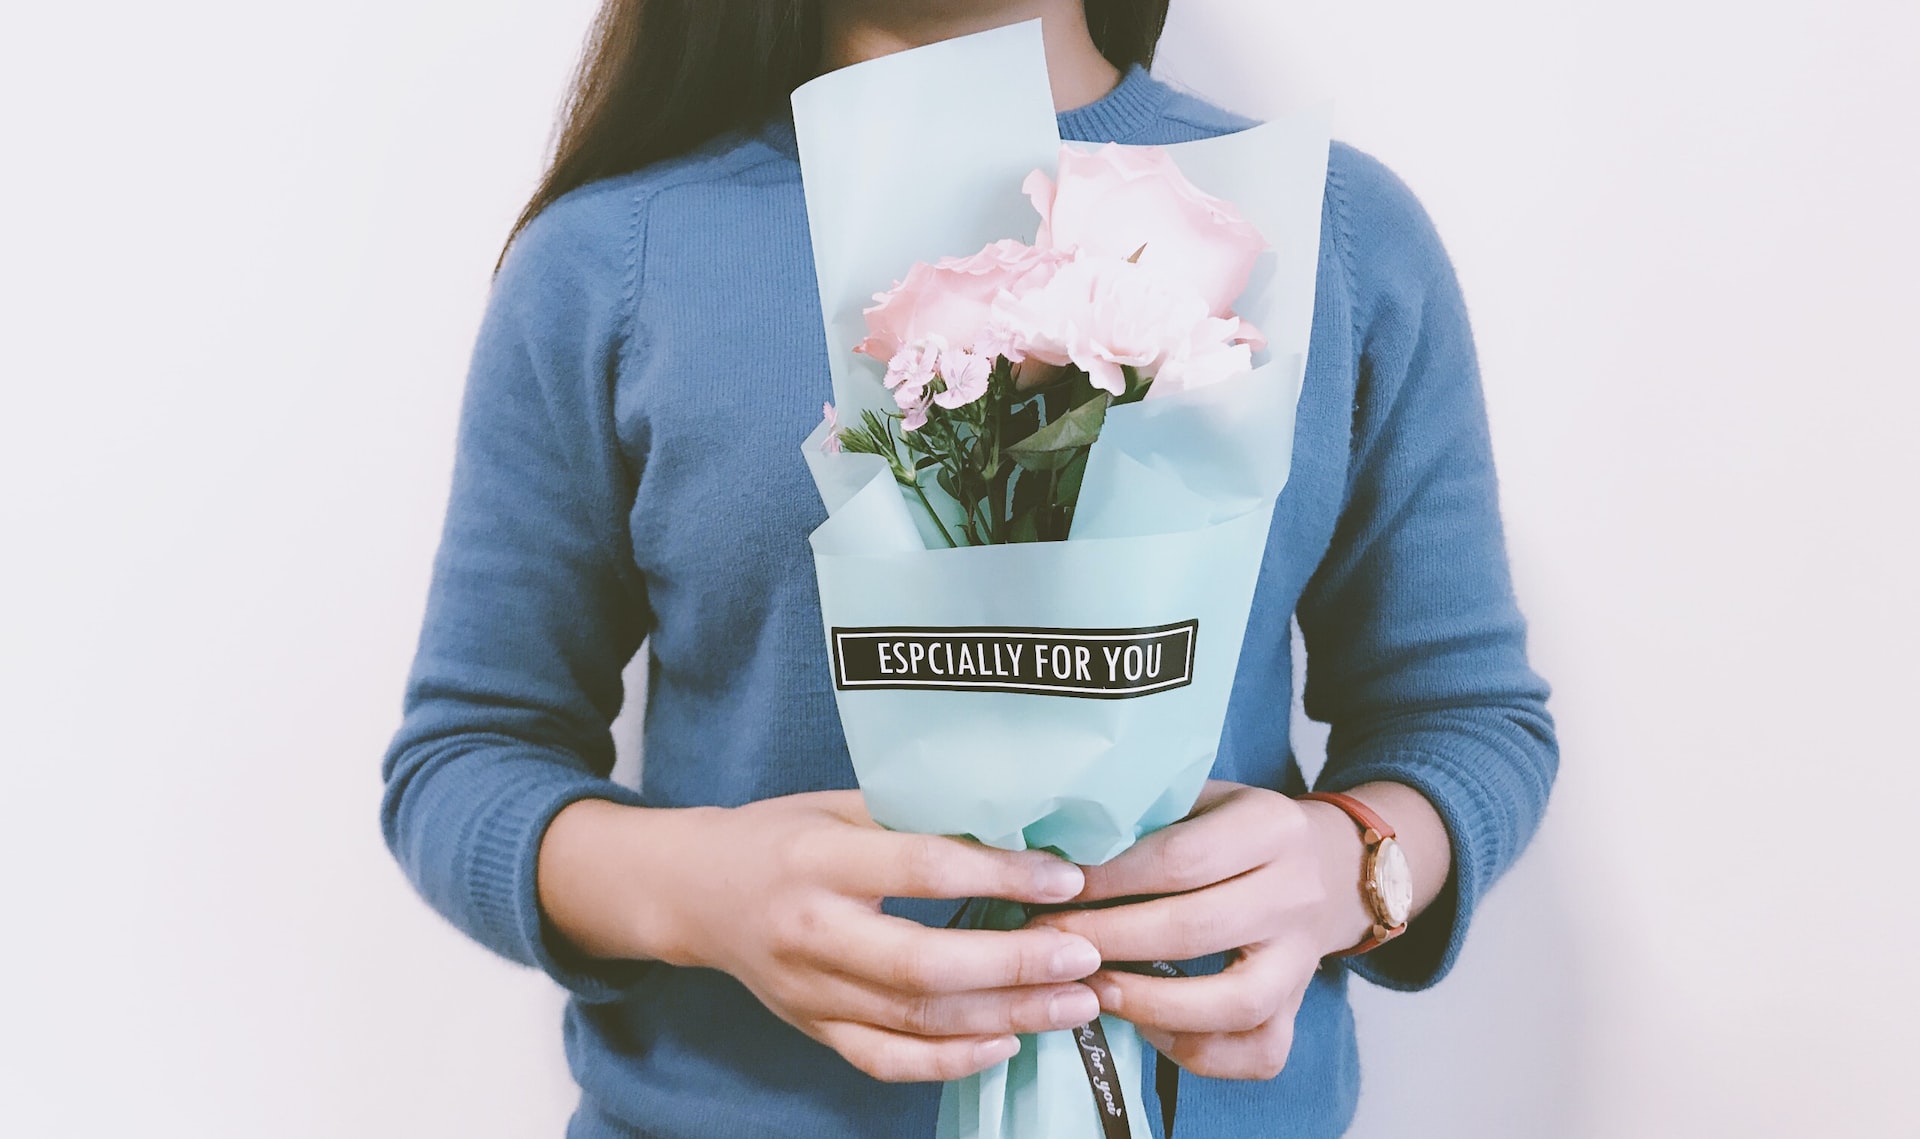 A woman holding a bouquet of flowers that says "especially for you"